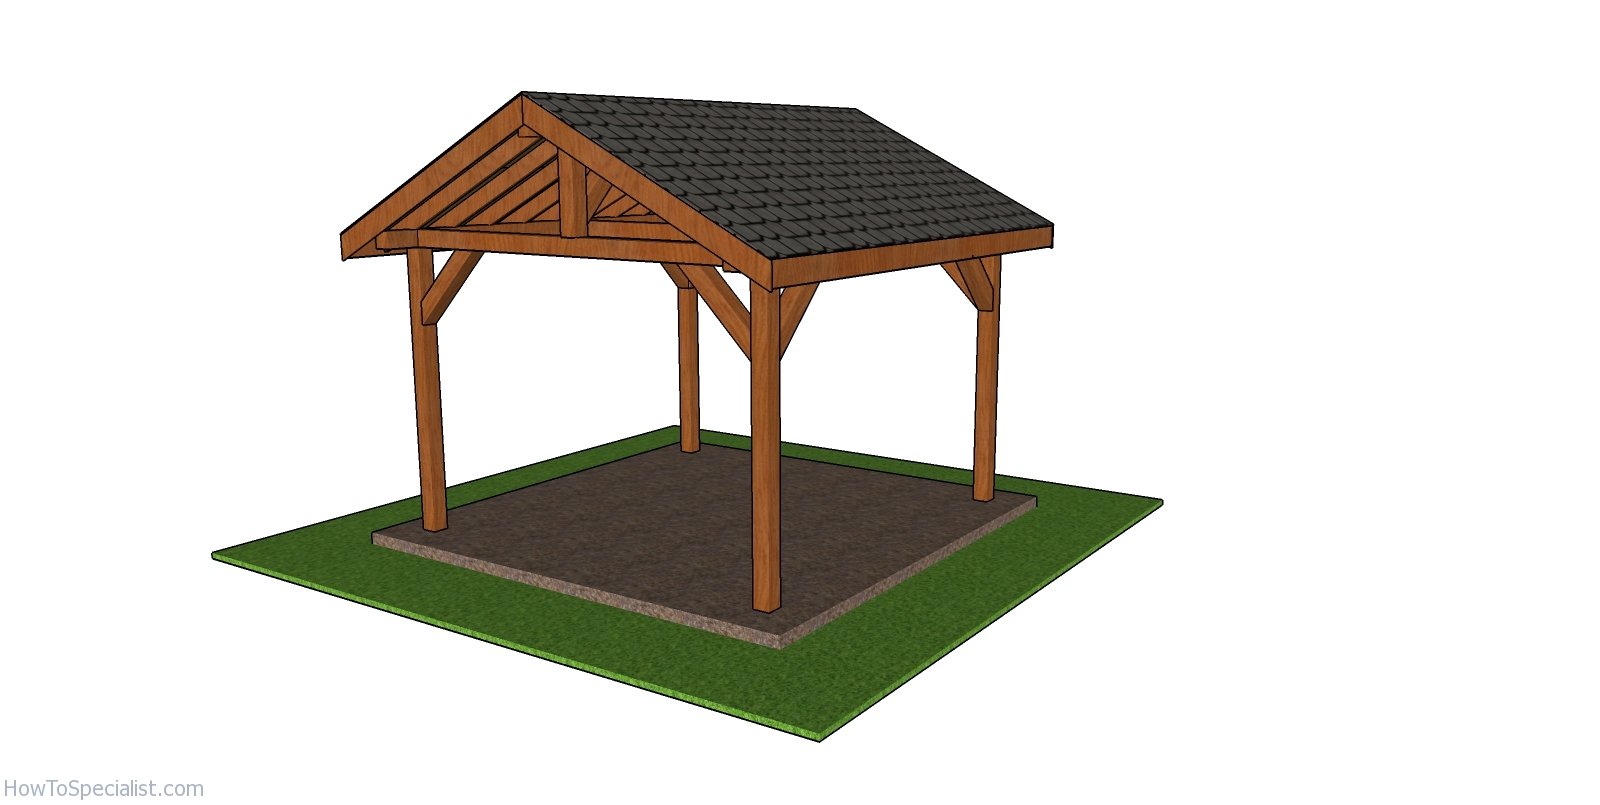 How To Build A Pavilion Step By Step 12x12 Outdoor Pavilion - Free DIY Plans | HowToSpecialist